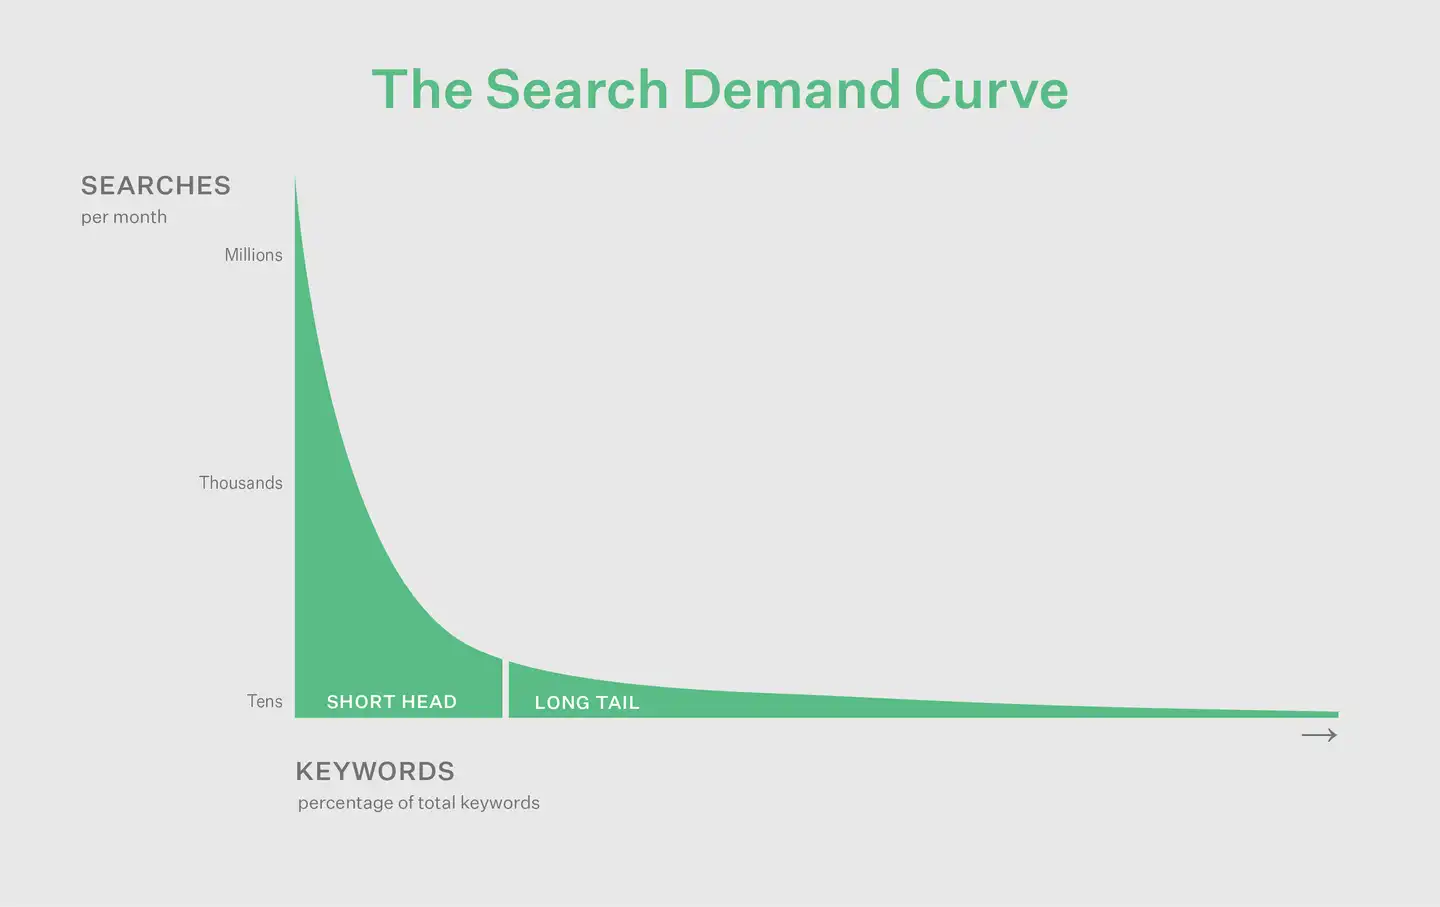 A graph of the search demand curve